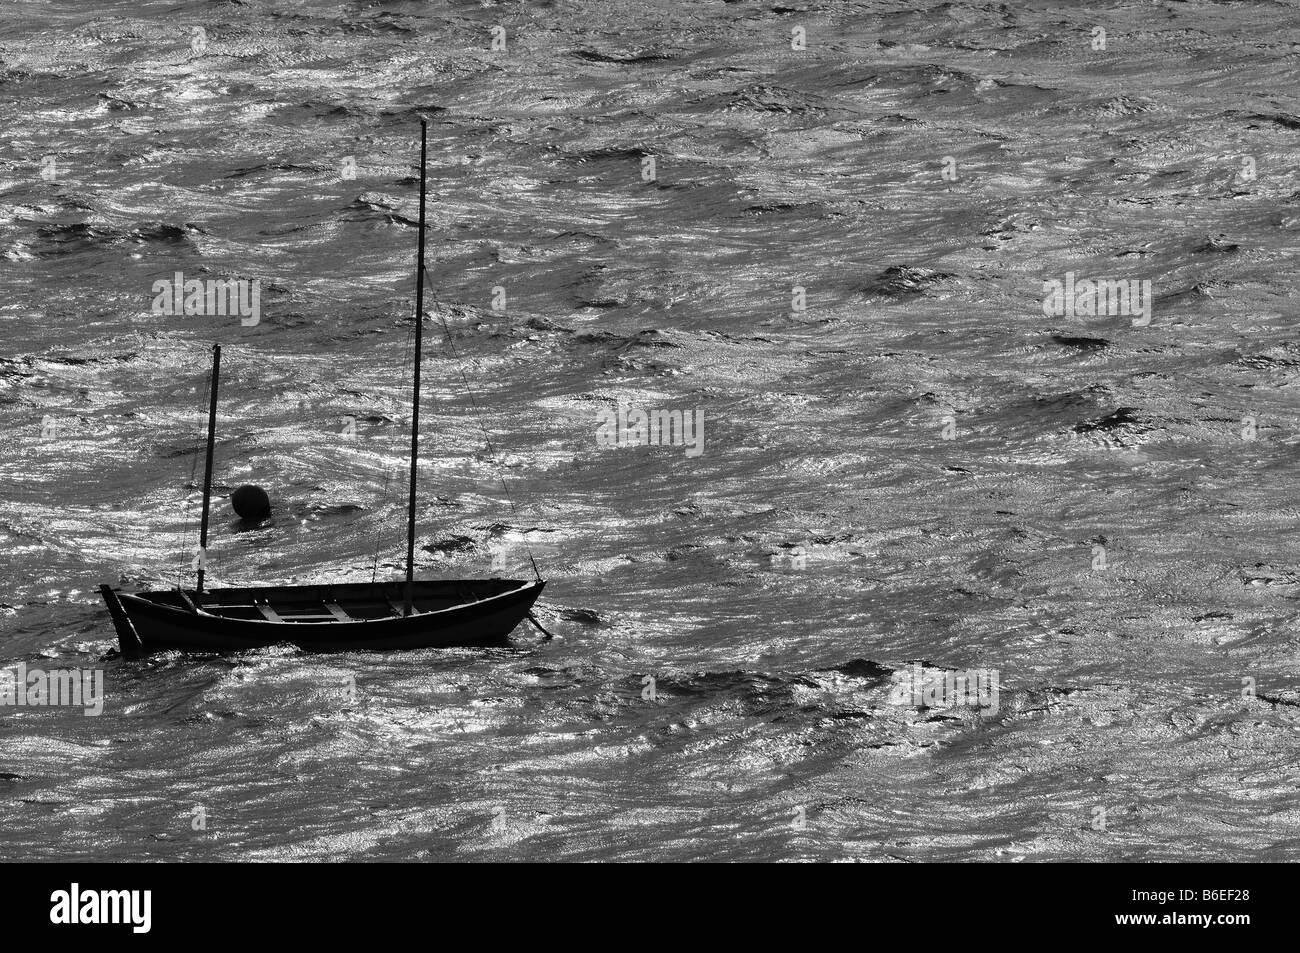 A fishing sail-boat, masts down rocks back and forth on the stormy seas in a strong wind. Solitude, peace, rest and relaxation. Stock Photo